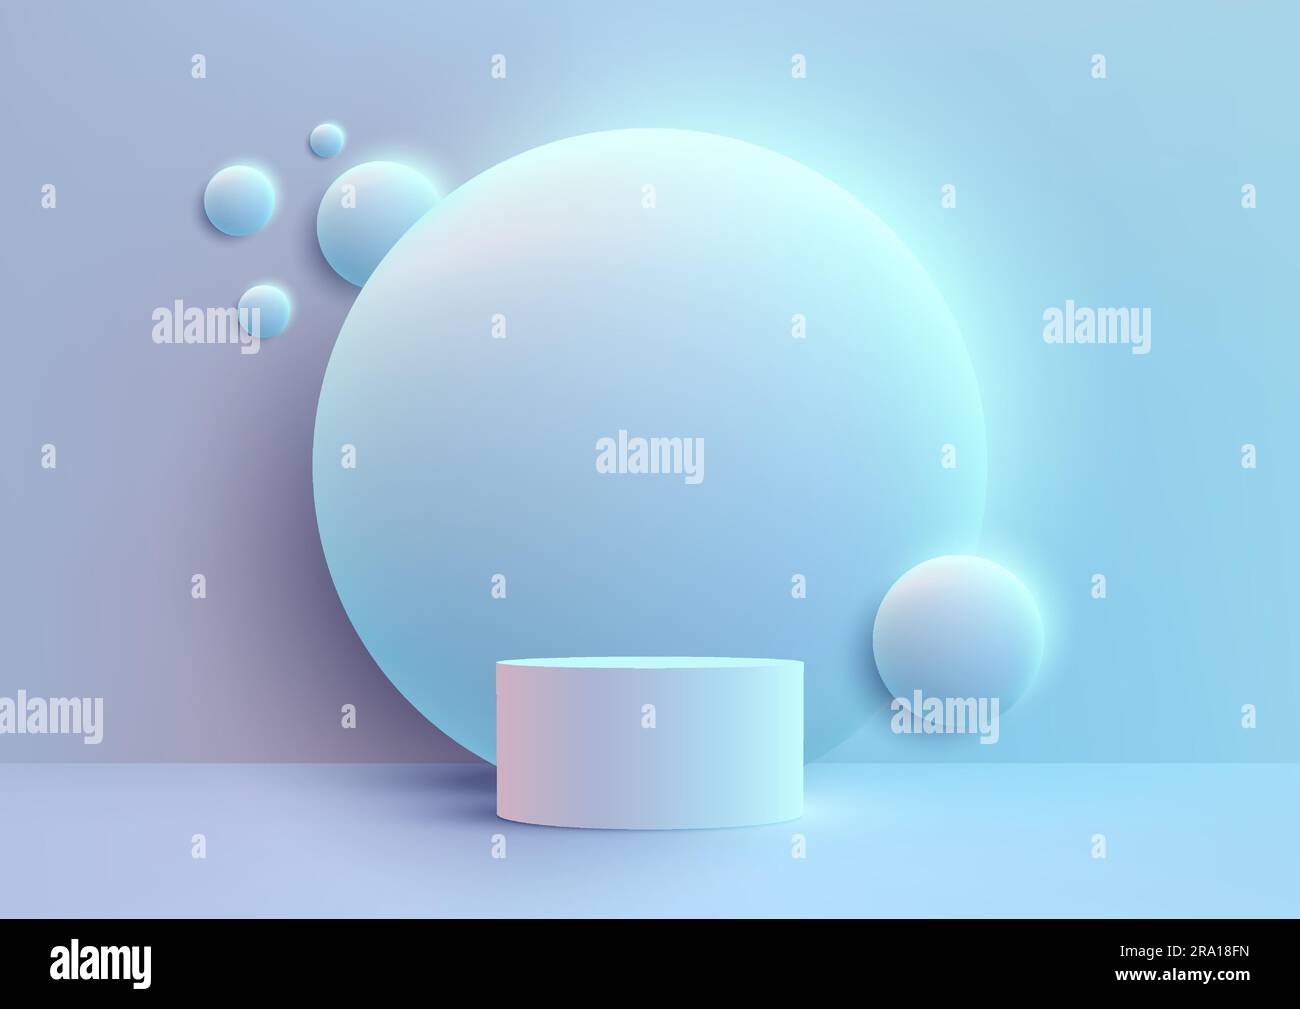 Blue pastel colors and modern minimalism in this 3D realistic showcase podium. With a circle backdrop and sleek design, this vector illustration is pe Stock Vector